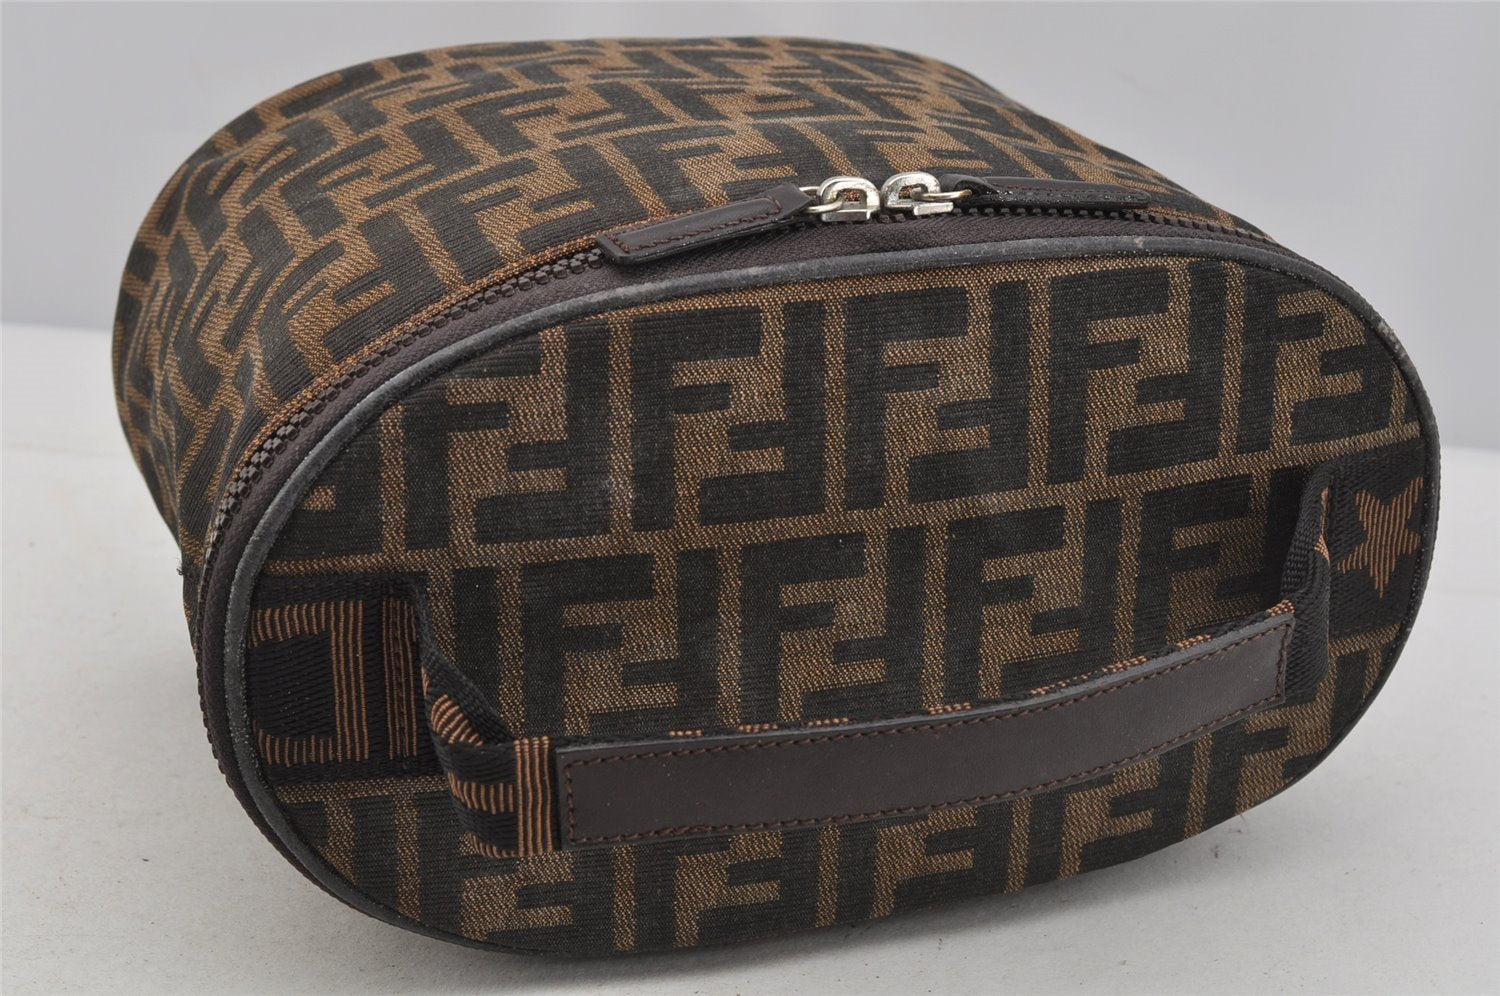 Authentic FENDI Zucca Vanity Hand Bag Pouch Canvas Leather Brown Junk 4942J